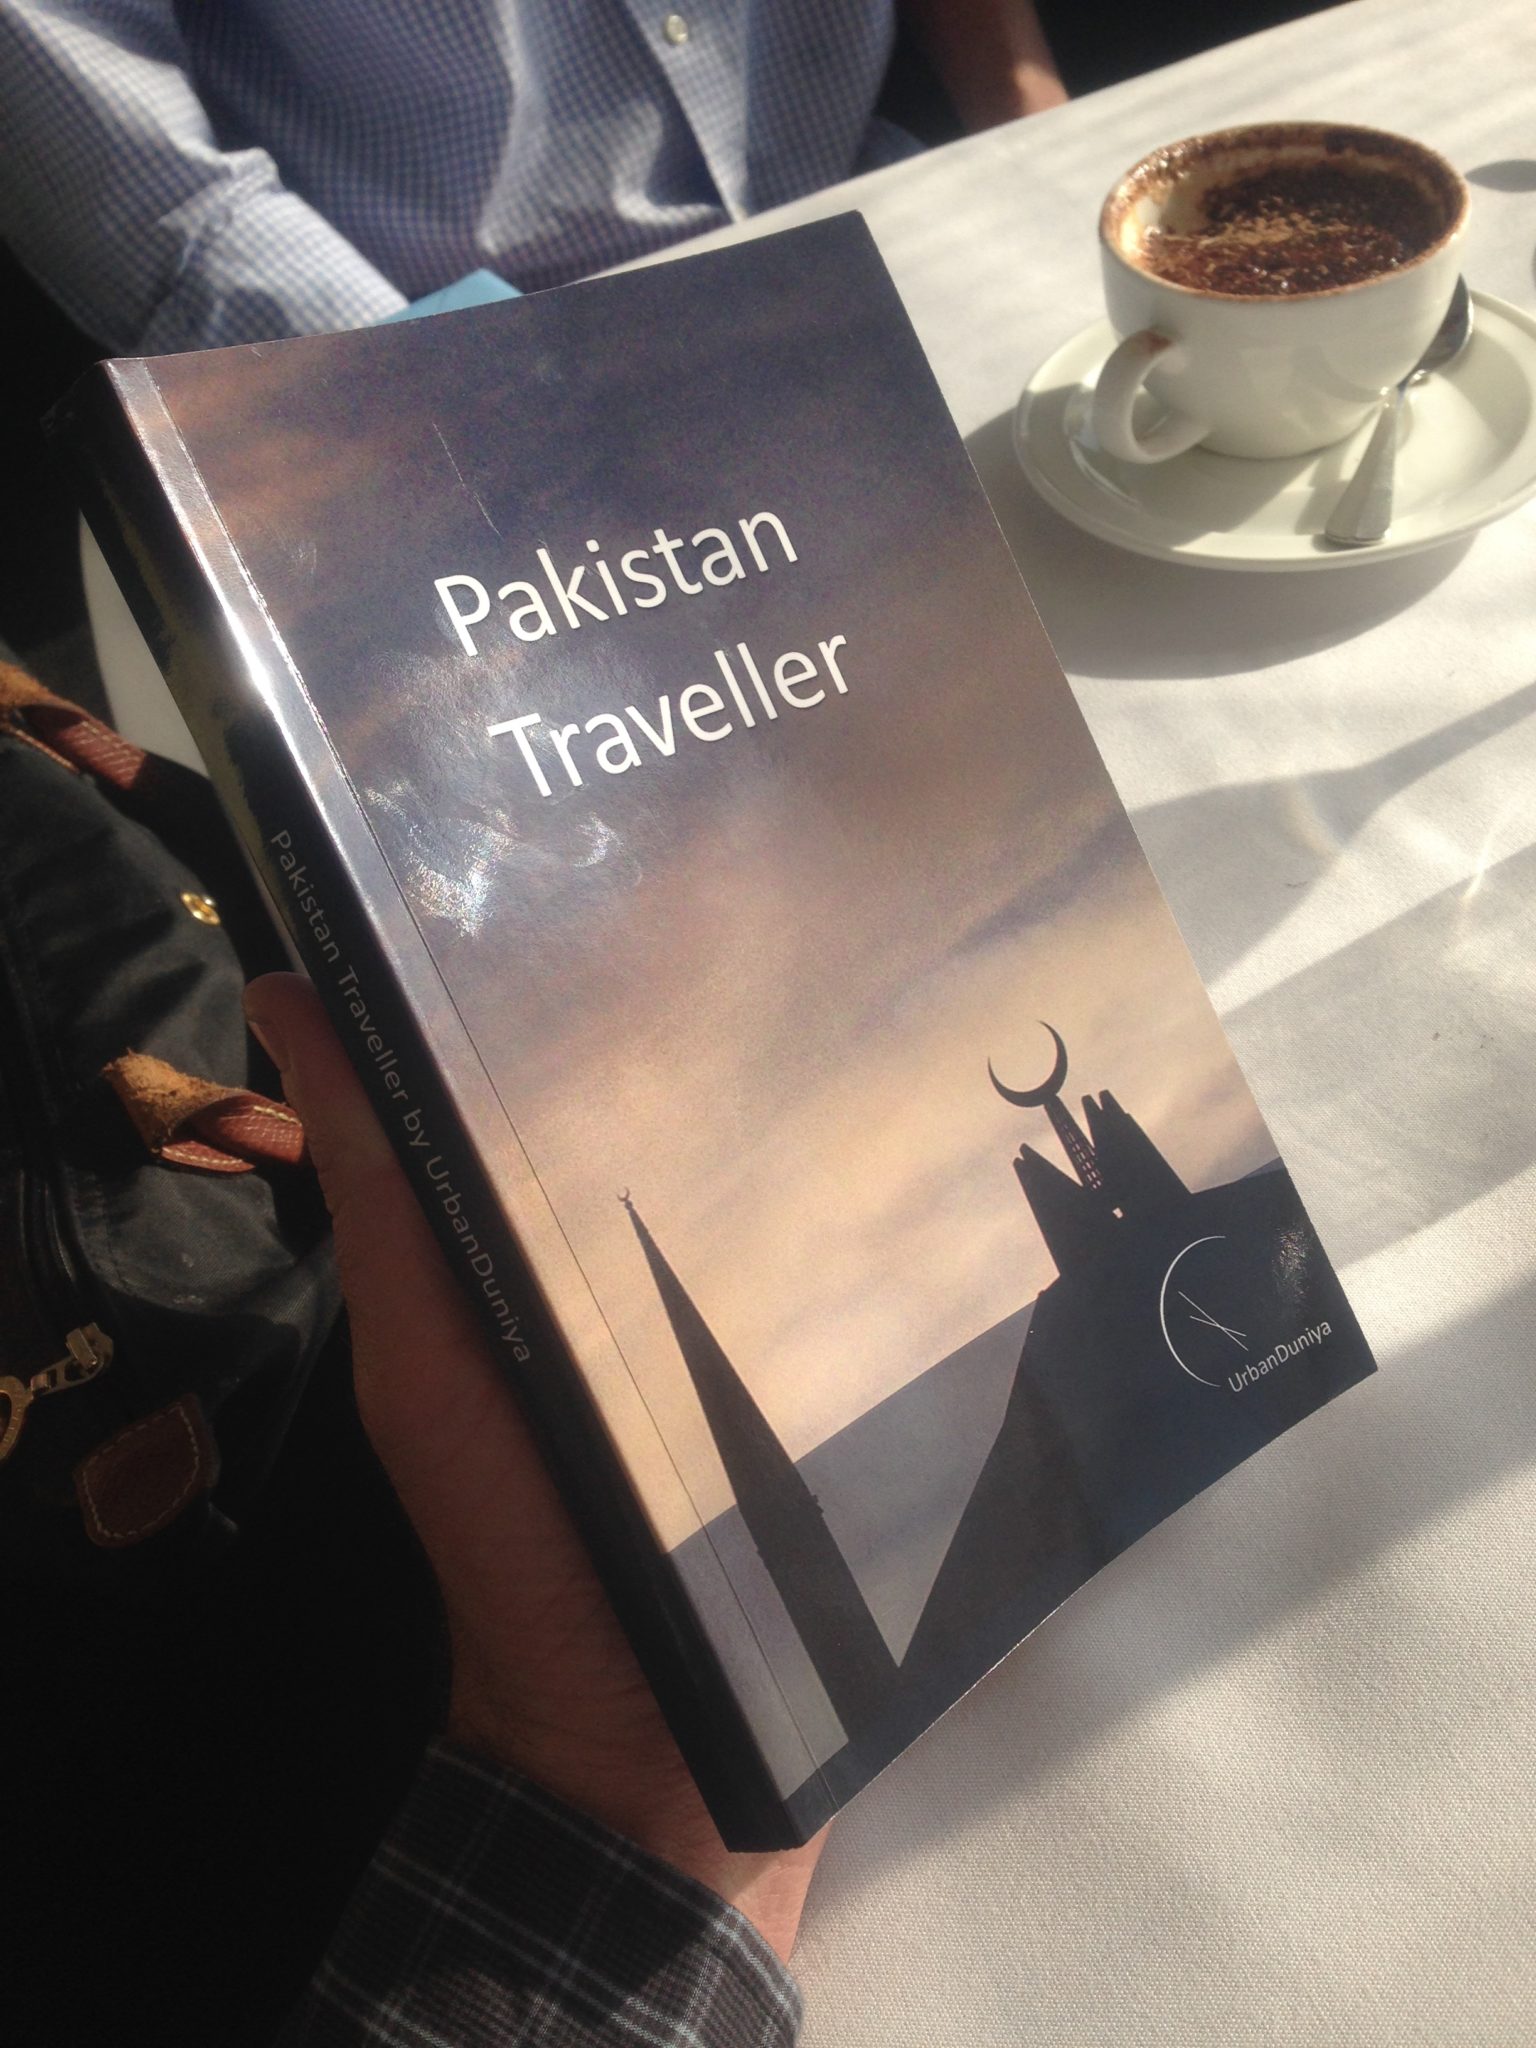 OMG it's tangible!! The first printed copy of Pakistan Traveller by UrbanDuniya